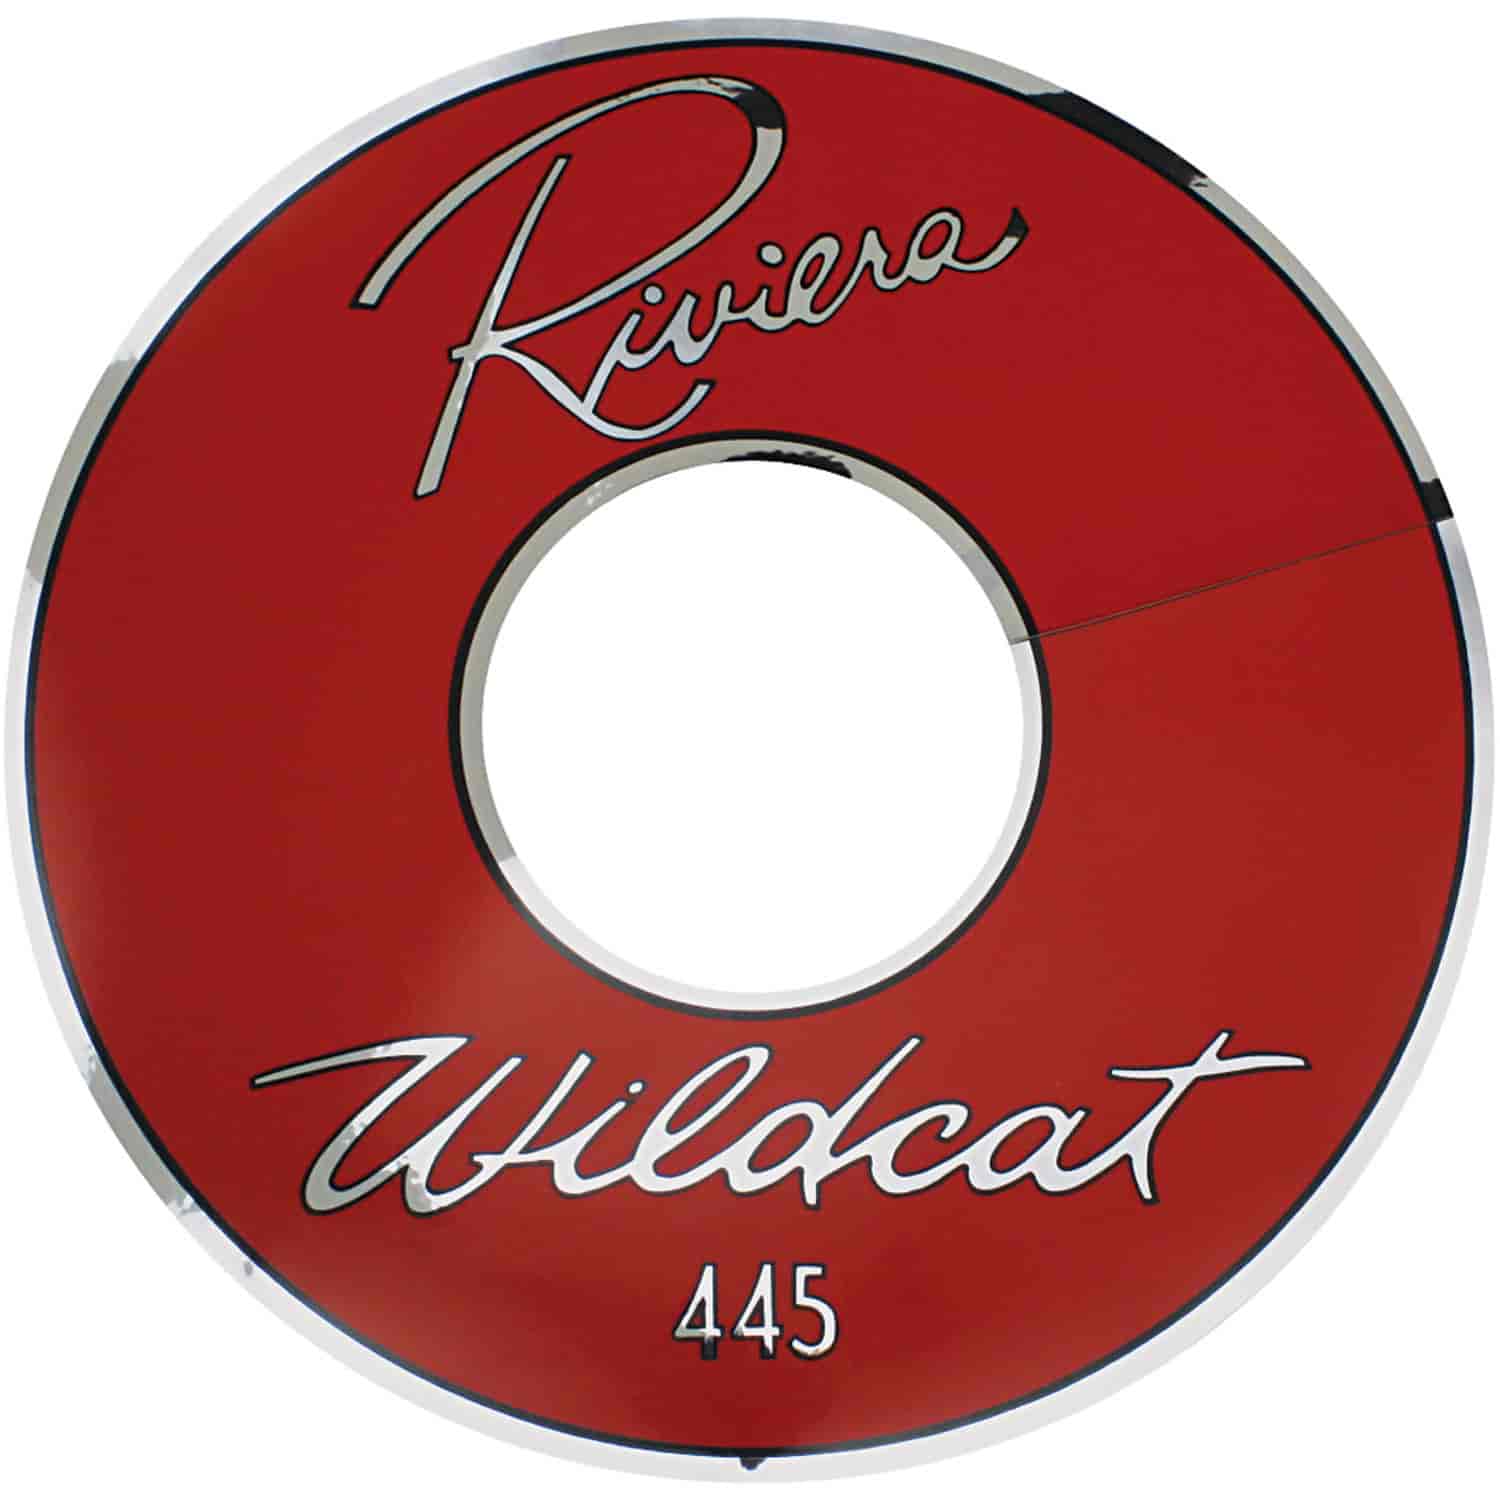 Decal 63 Riviera Air Cleaner Wildcat 445 14 Red